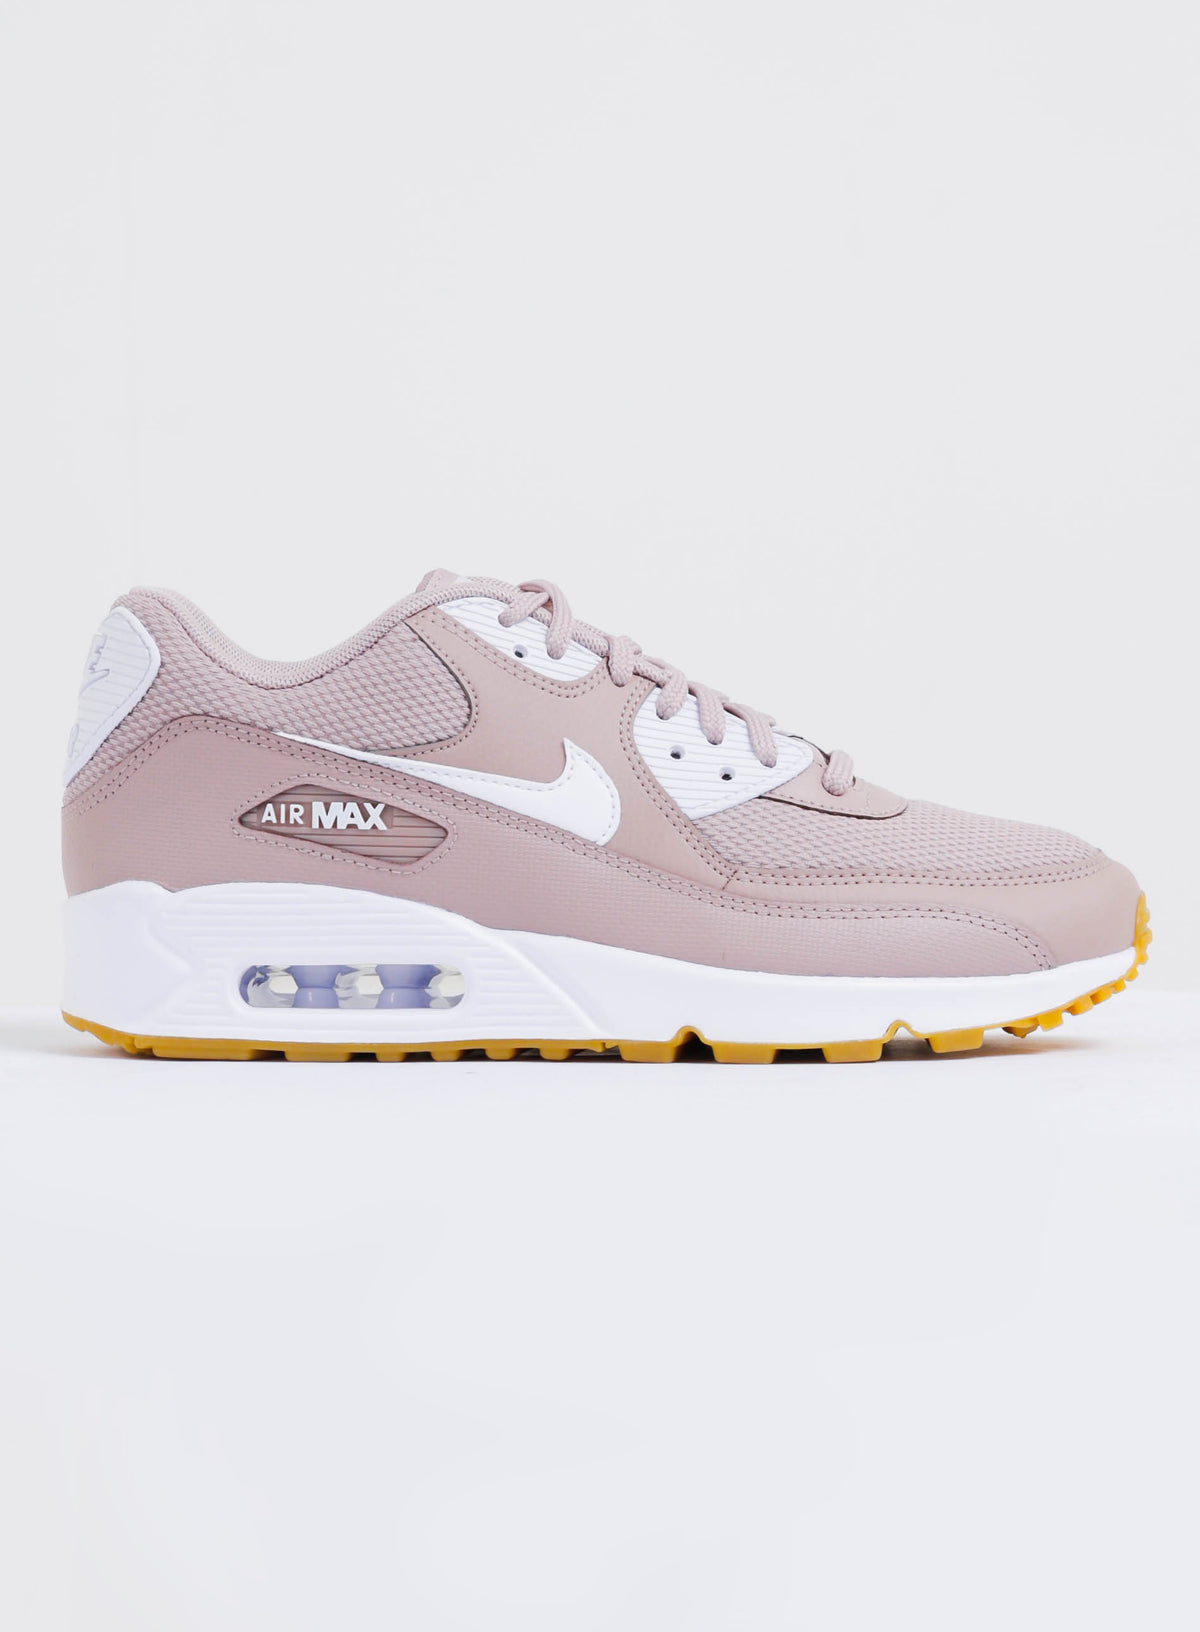 Womens Air Max 90 Sneakers in Taupe &amp; White